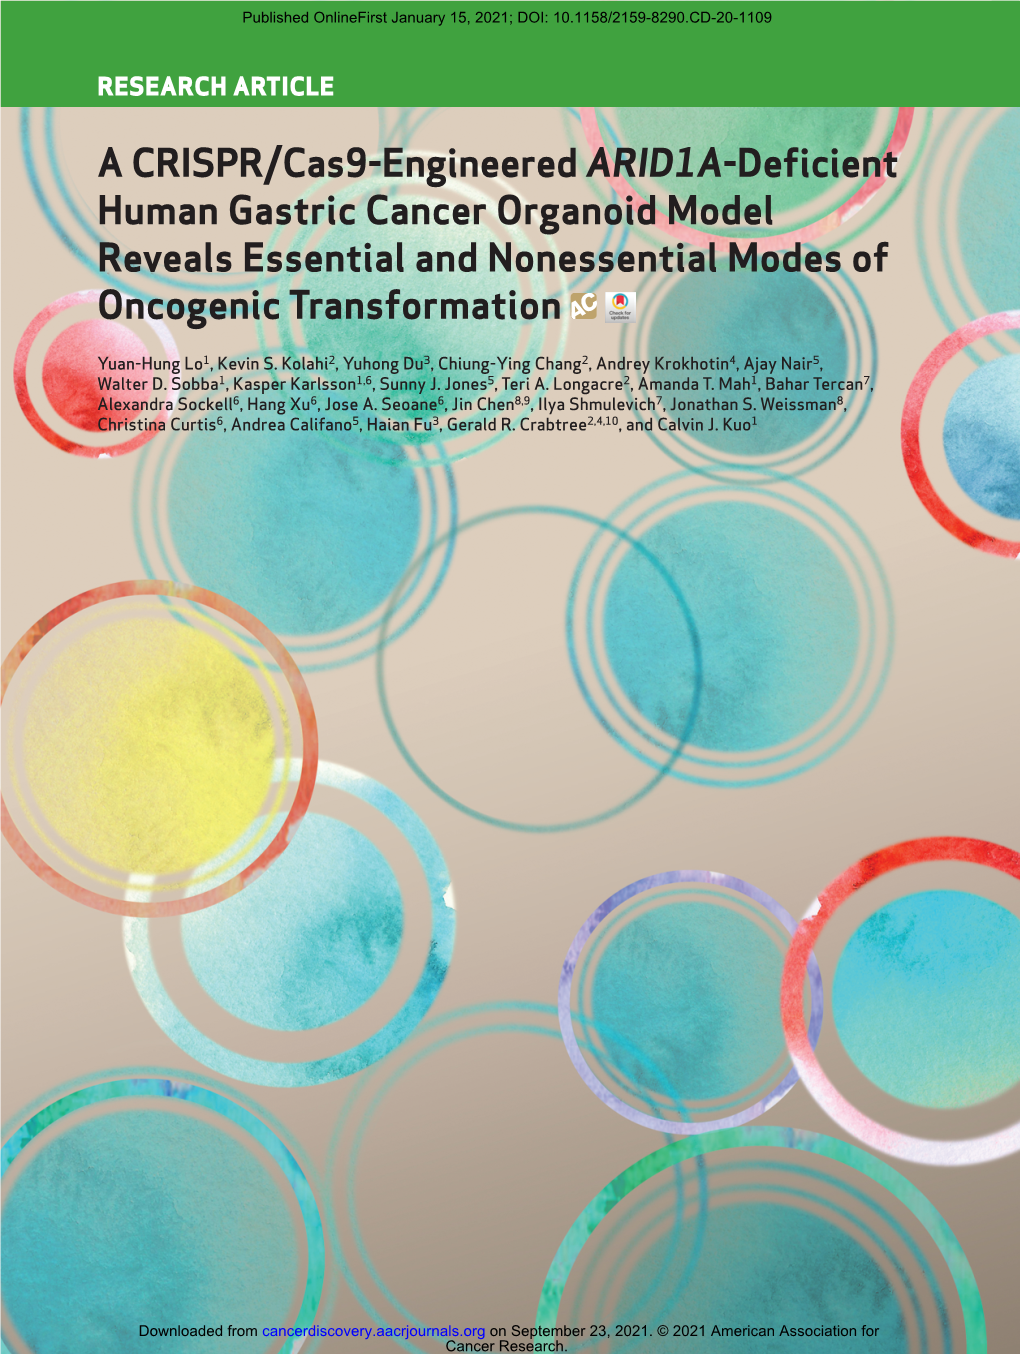 A CRISPR/Cas9-Engineered ARID1A-Deficient Human Gastric Cancer Organoid Model Reveals Essential and Nonessential Modes of Oncogenic Transformation